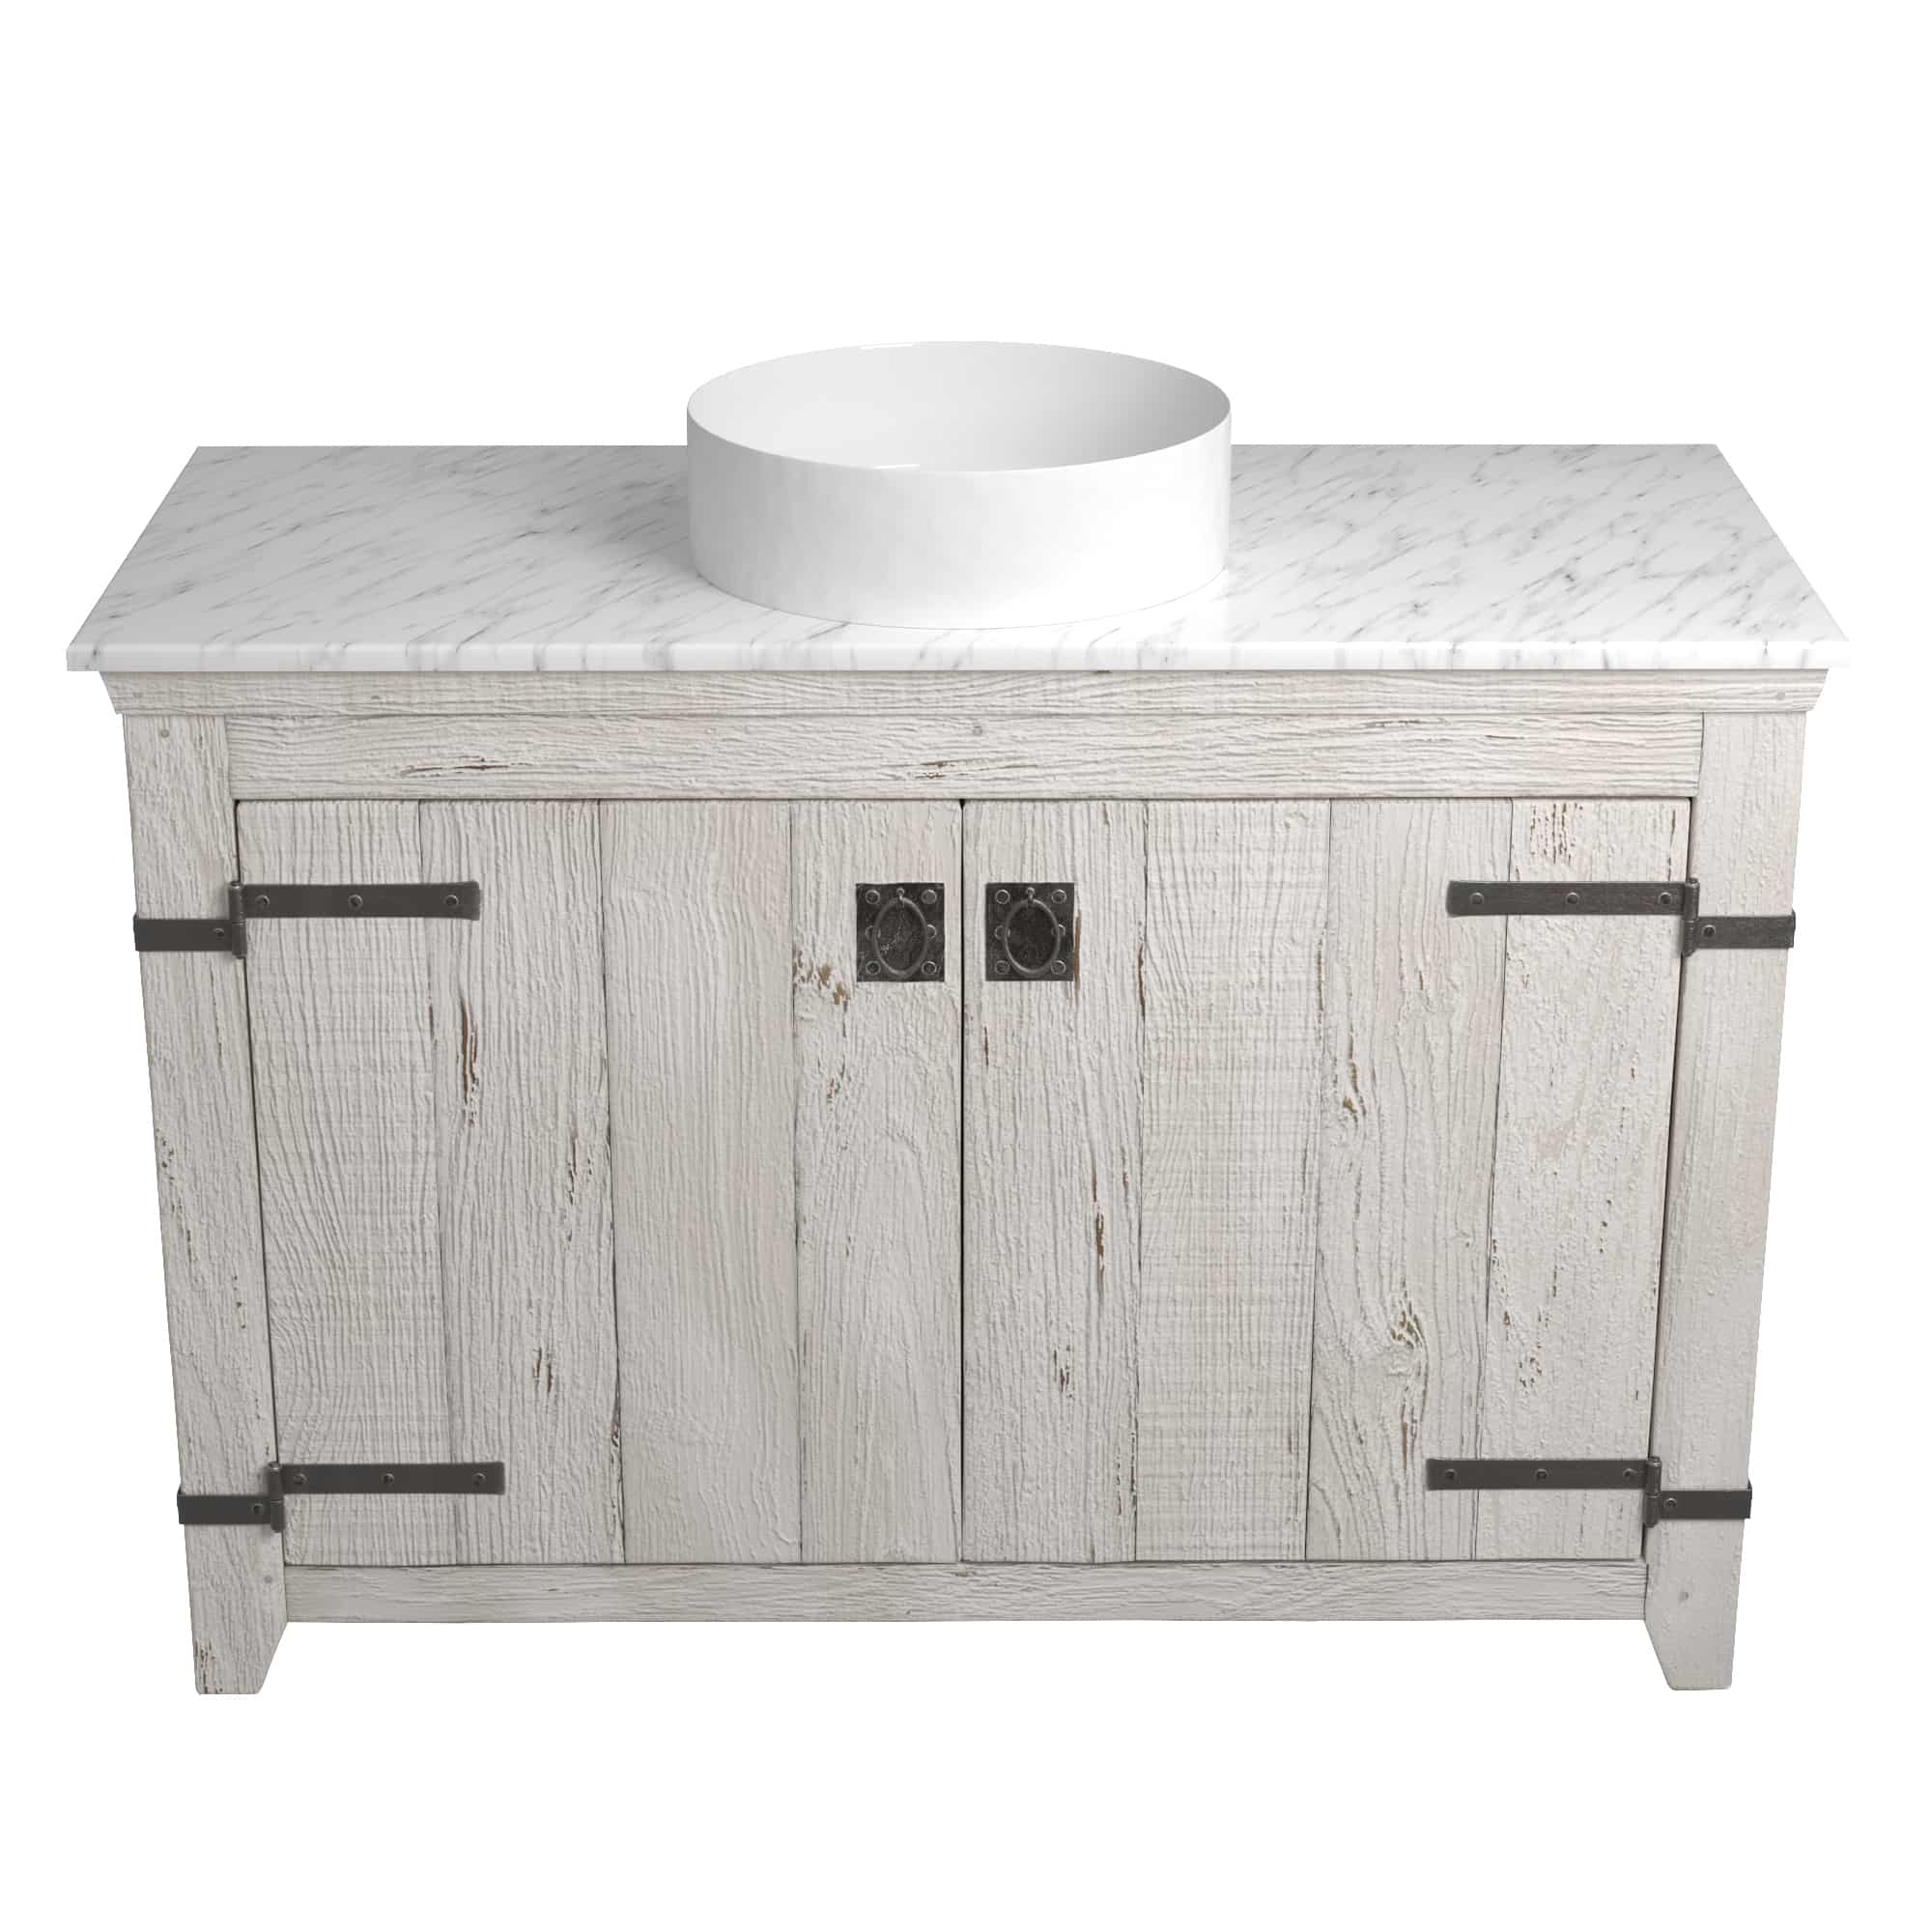 Native Trails 48" Americana Vanity in Whitewash with Carrara Marble Top and Positano in Bianco, Single Faucet Hole, BND48-VB-CT-MG-049